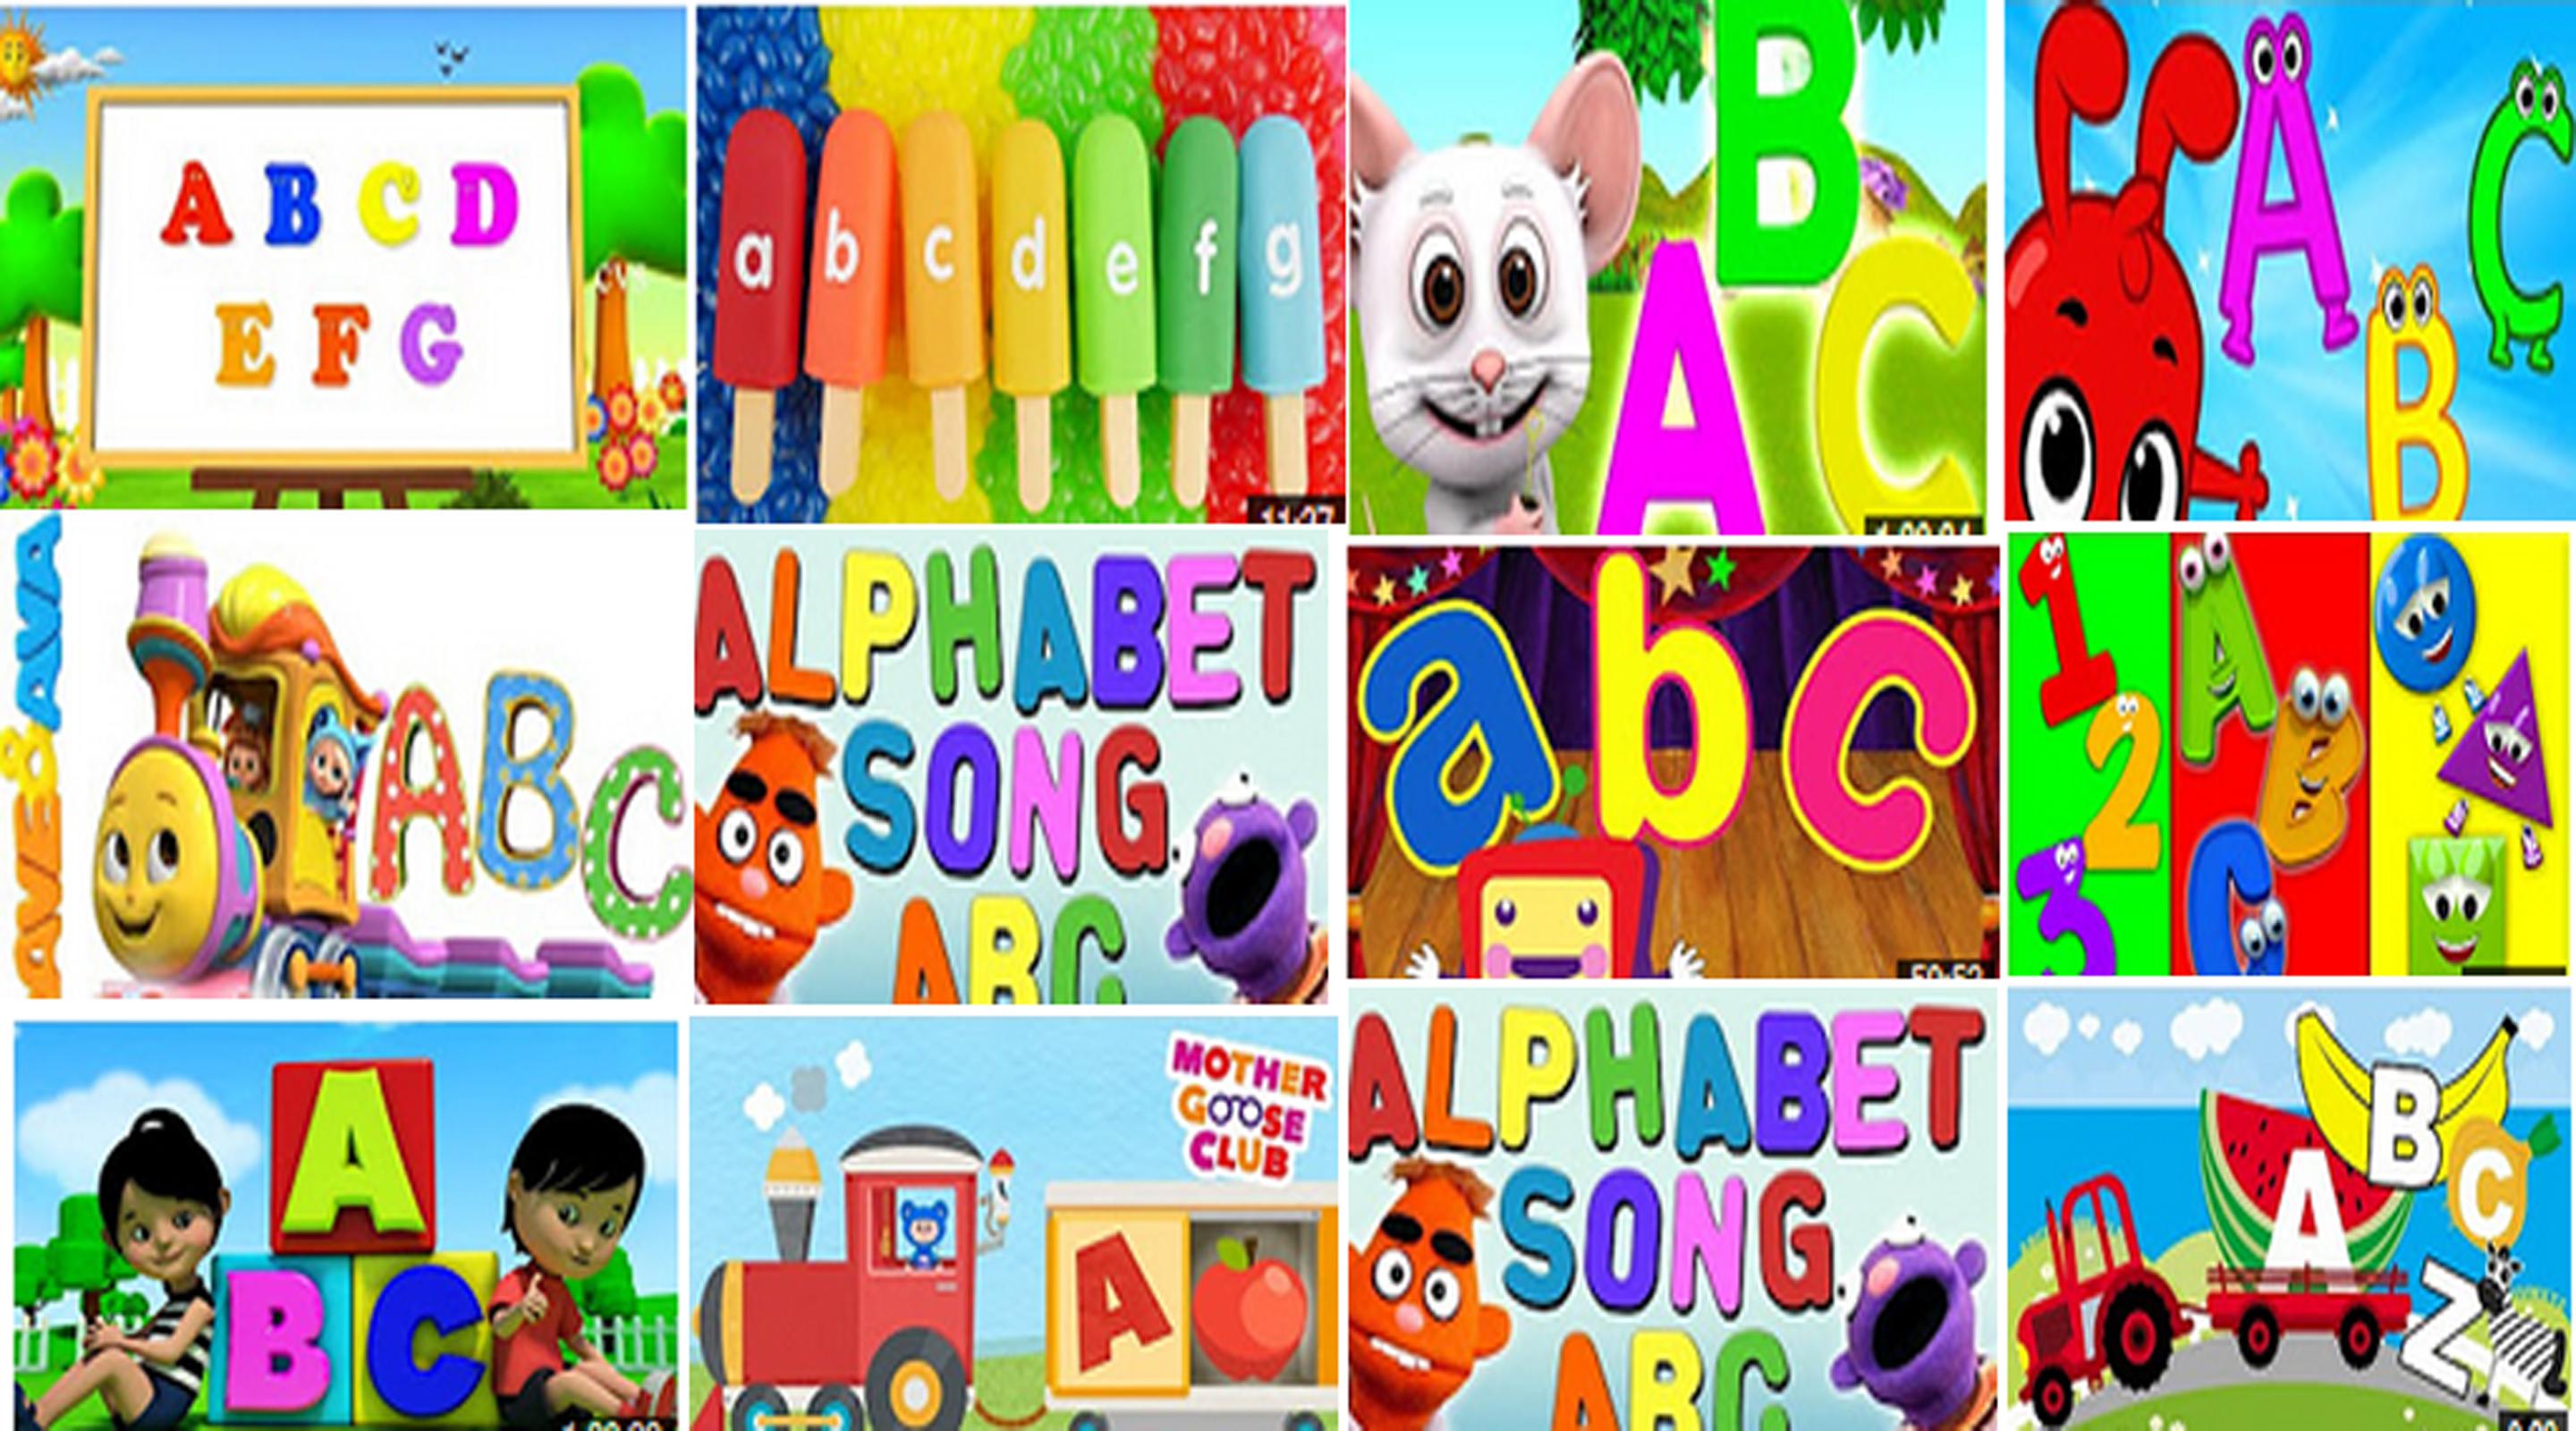 Alphabet Song | ABC Song | Phonics Song Download the Alph